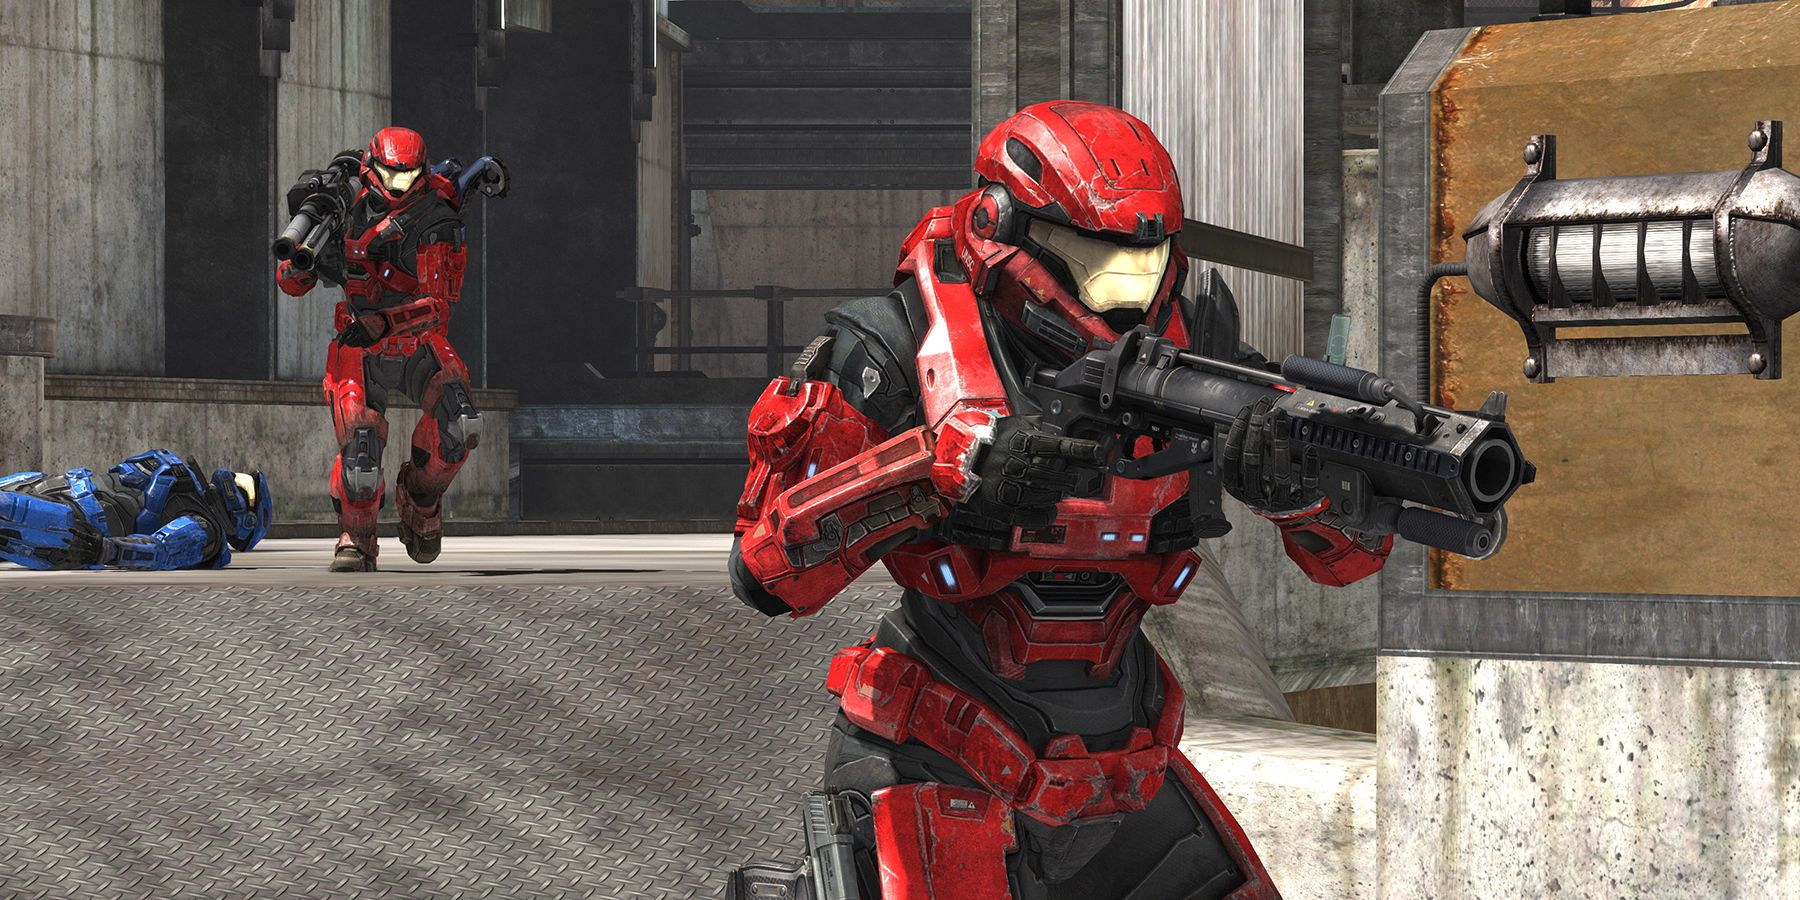 Two red players sticking close to each other in Halo Reach Multiplayer as a part of Halo The Master Chief Collection